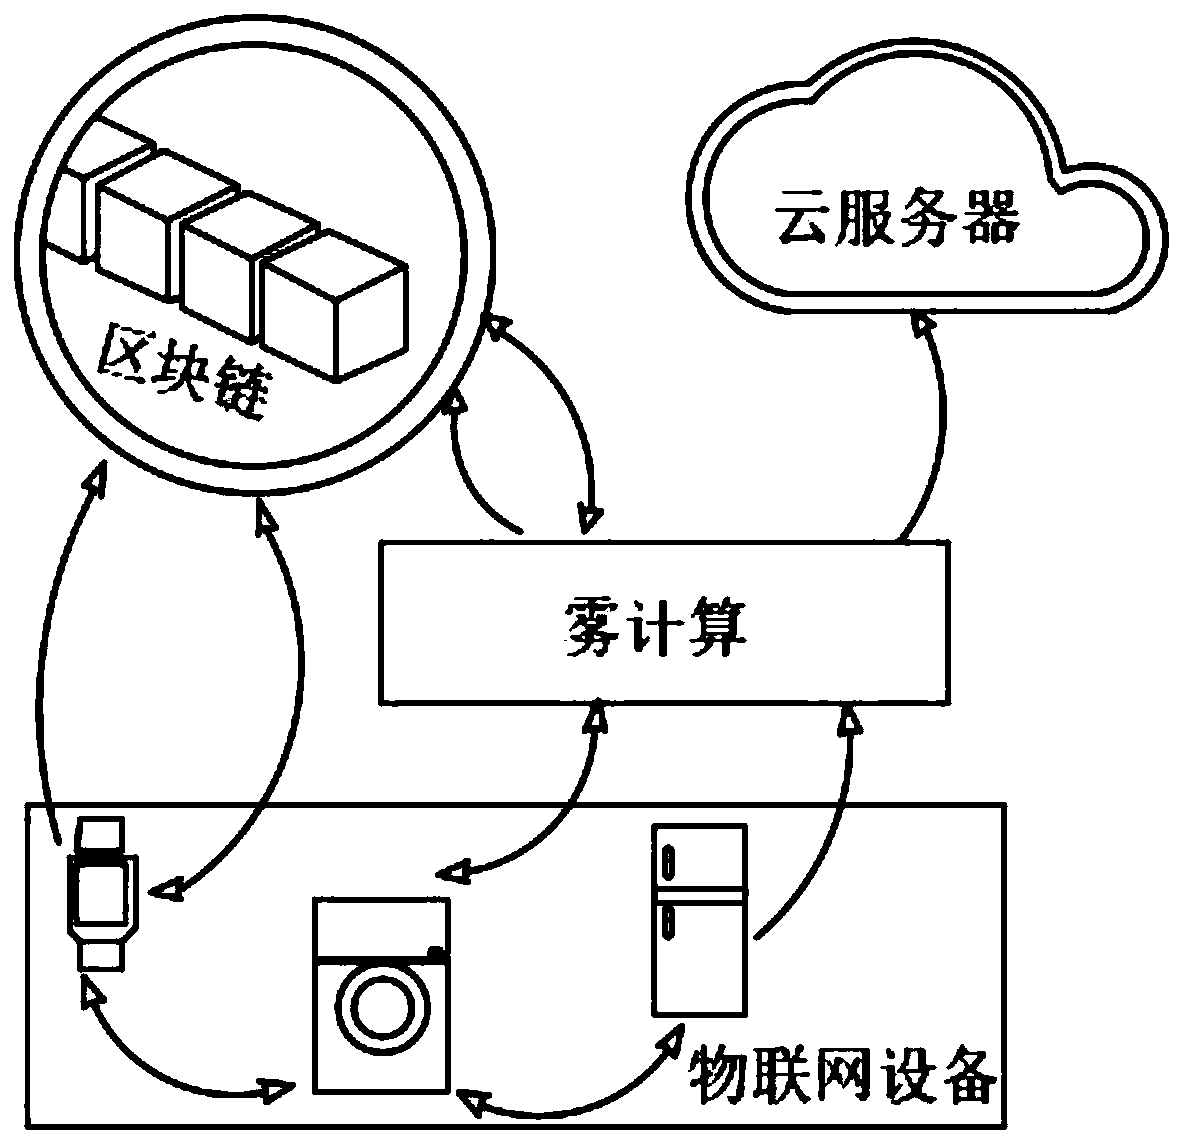 Internet of Things equipment authentication method based on block chain